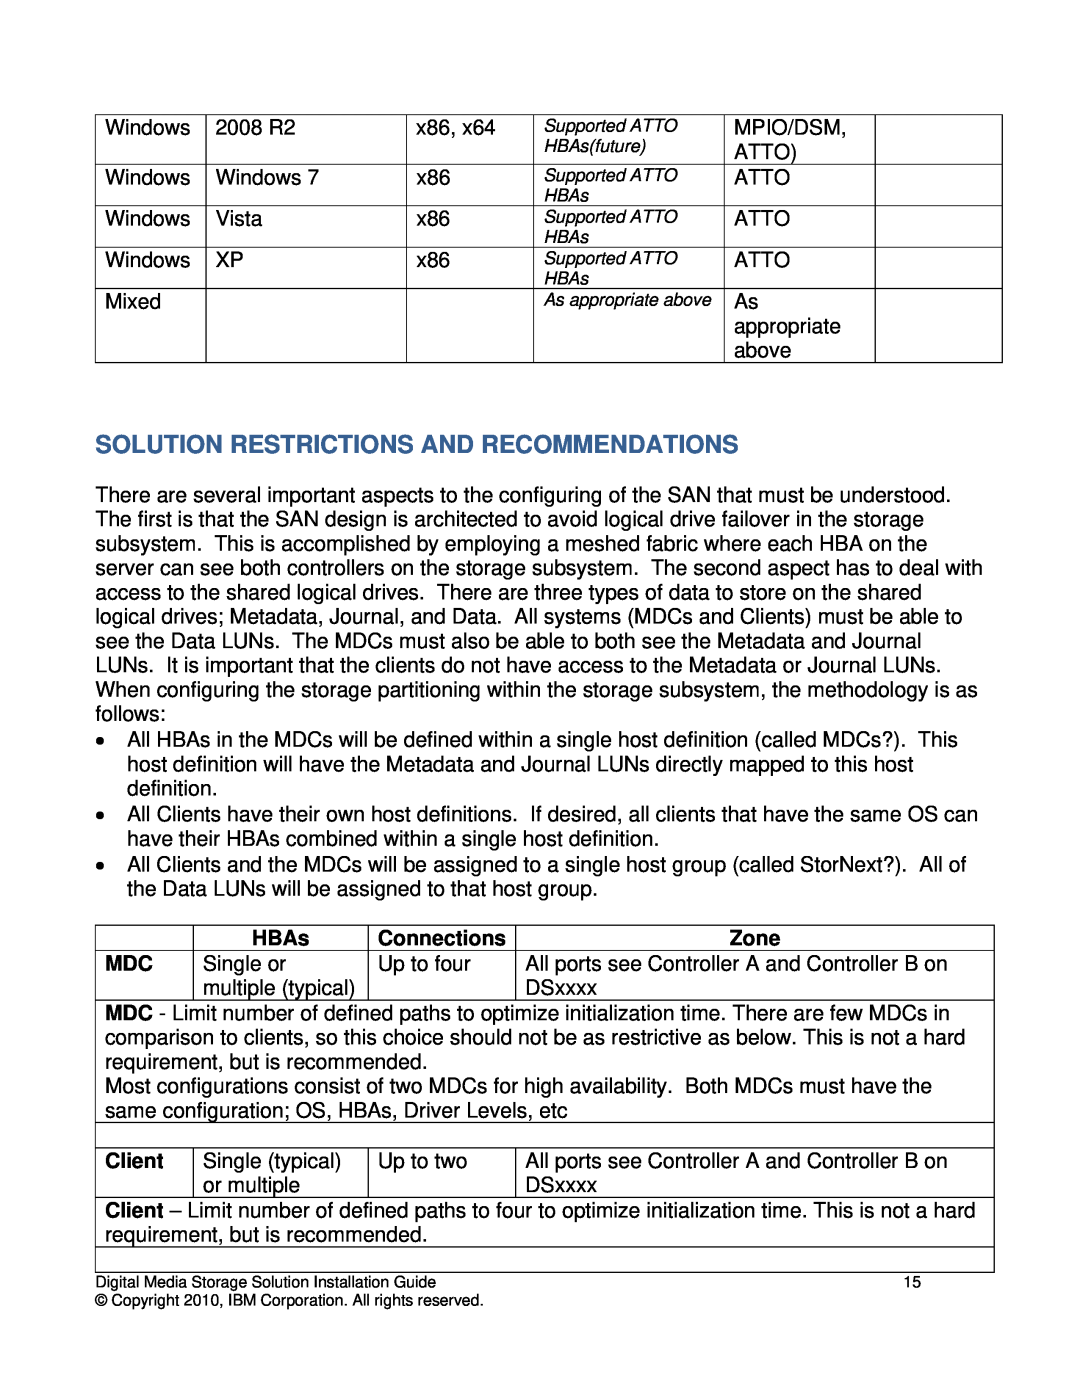 IBM DS3000 manual Solution Restrictions And Recommendations, HBAs, Connections, Zone, Client 